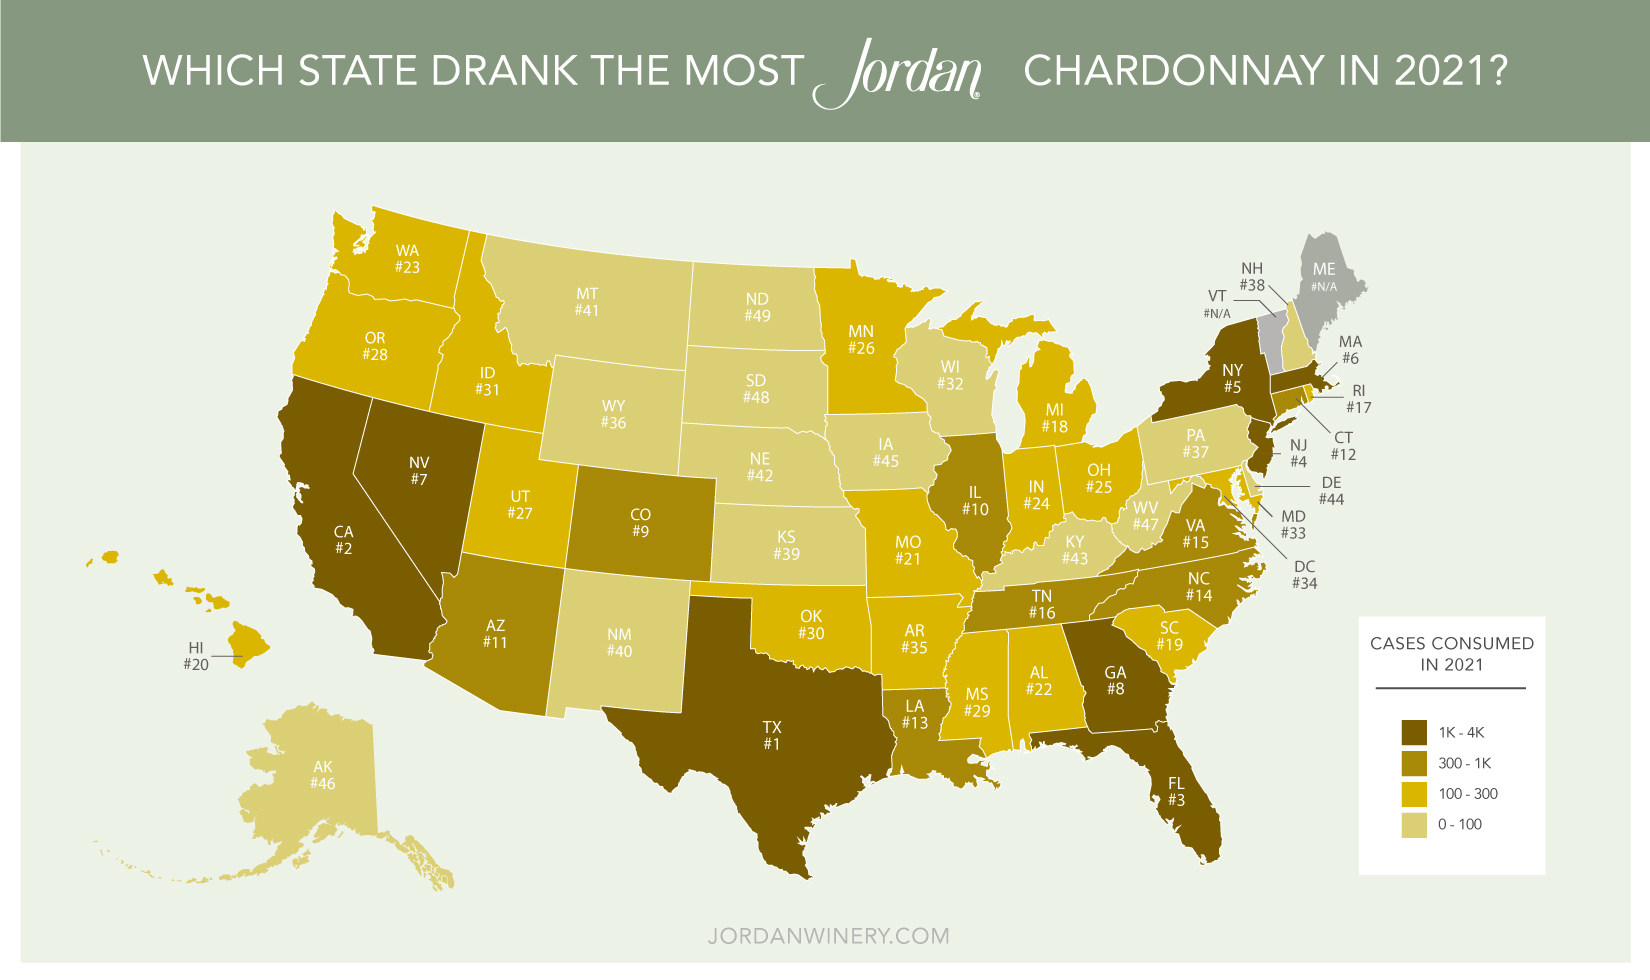 Map of the United States showing Jordan Chardonnay consumption by state